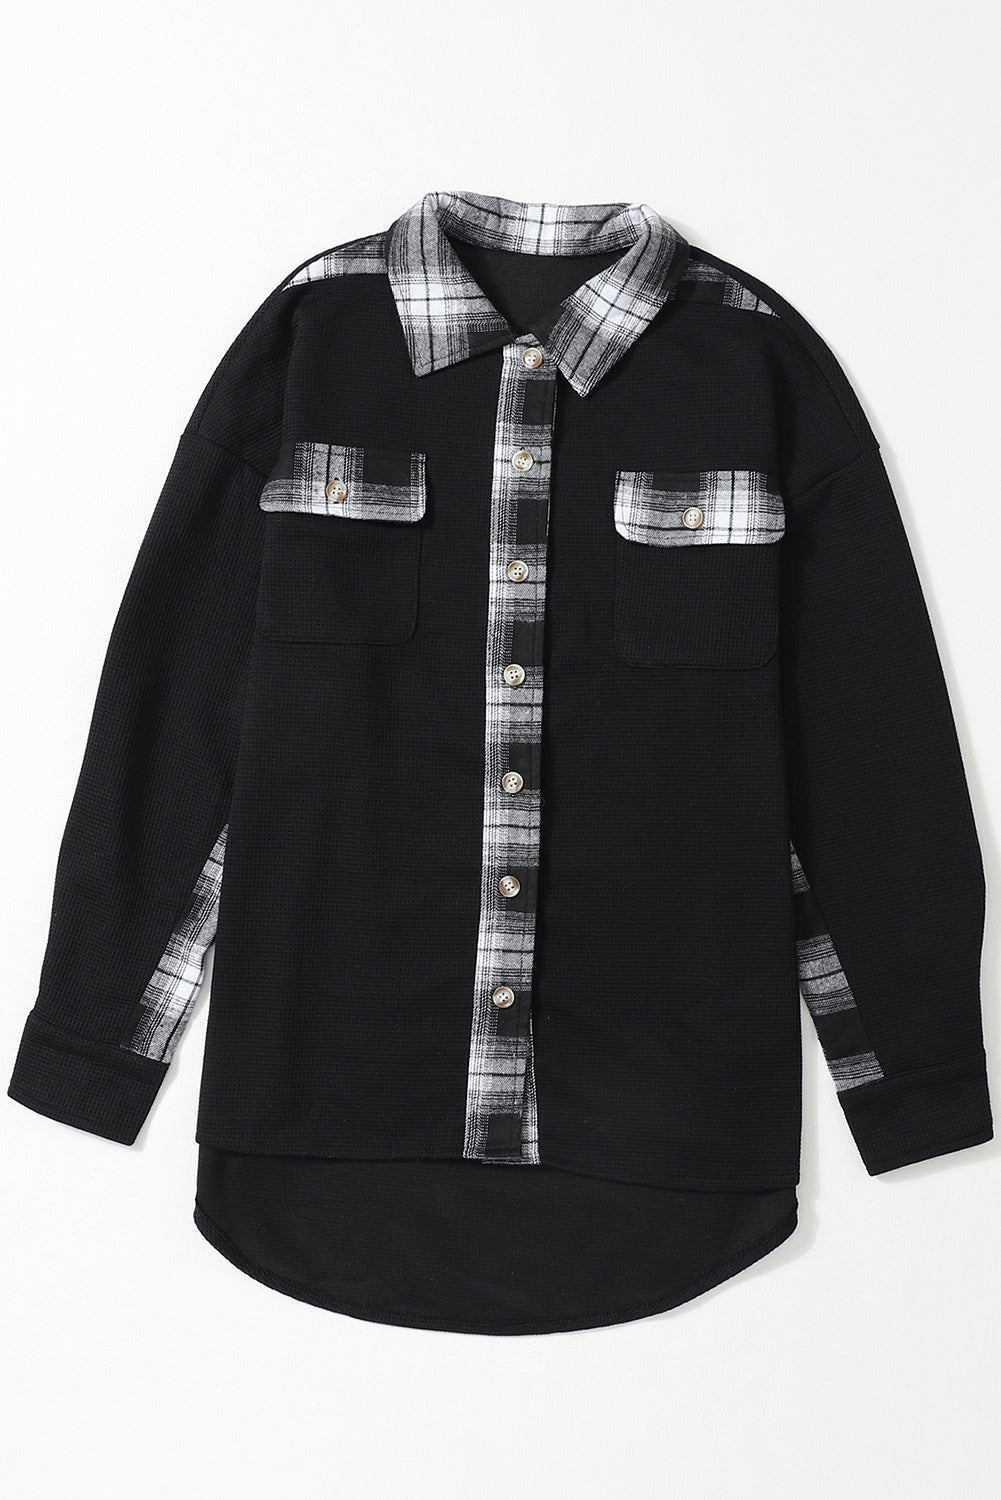 Black Plaid Patchwork Waffle Thermal Knit Shacket